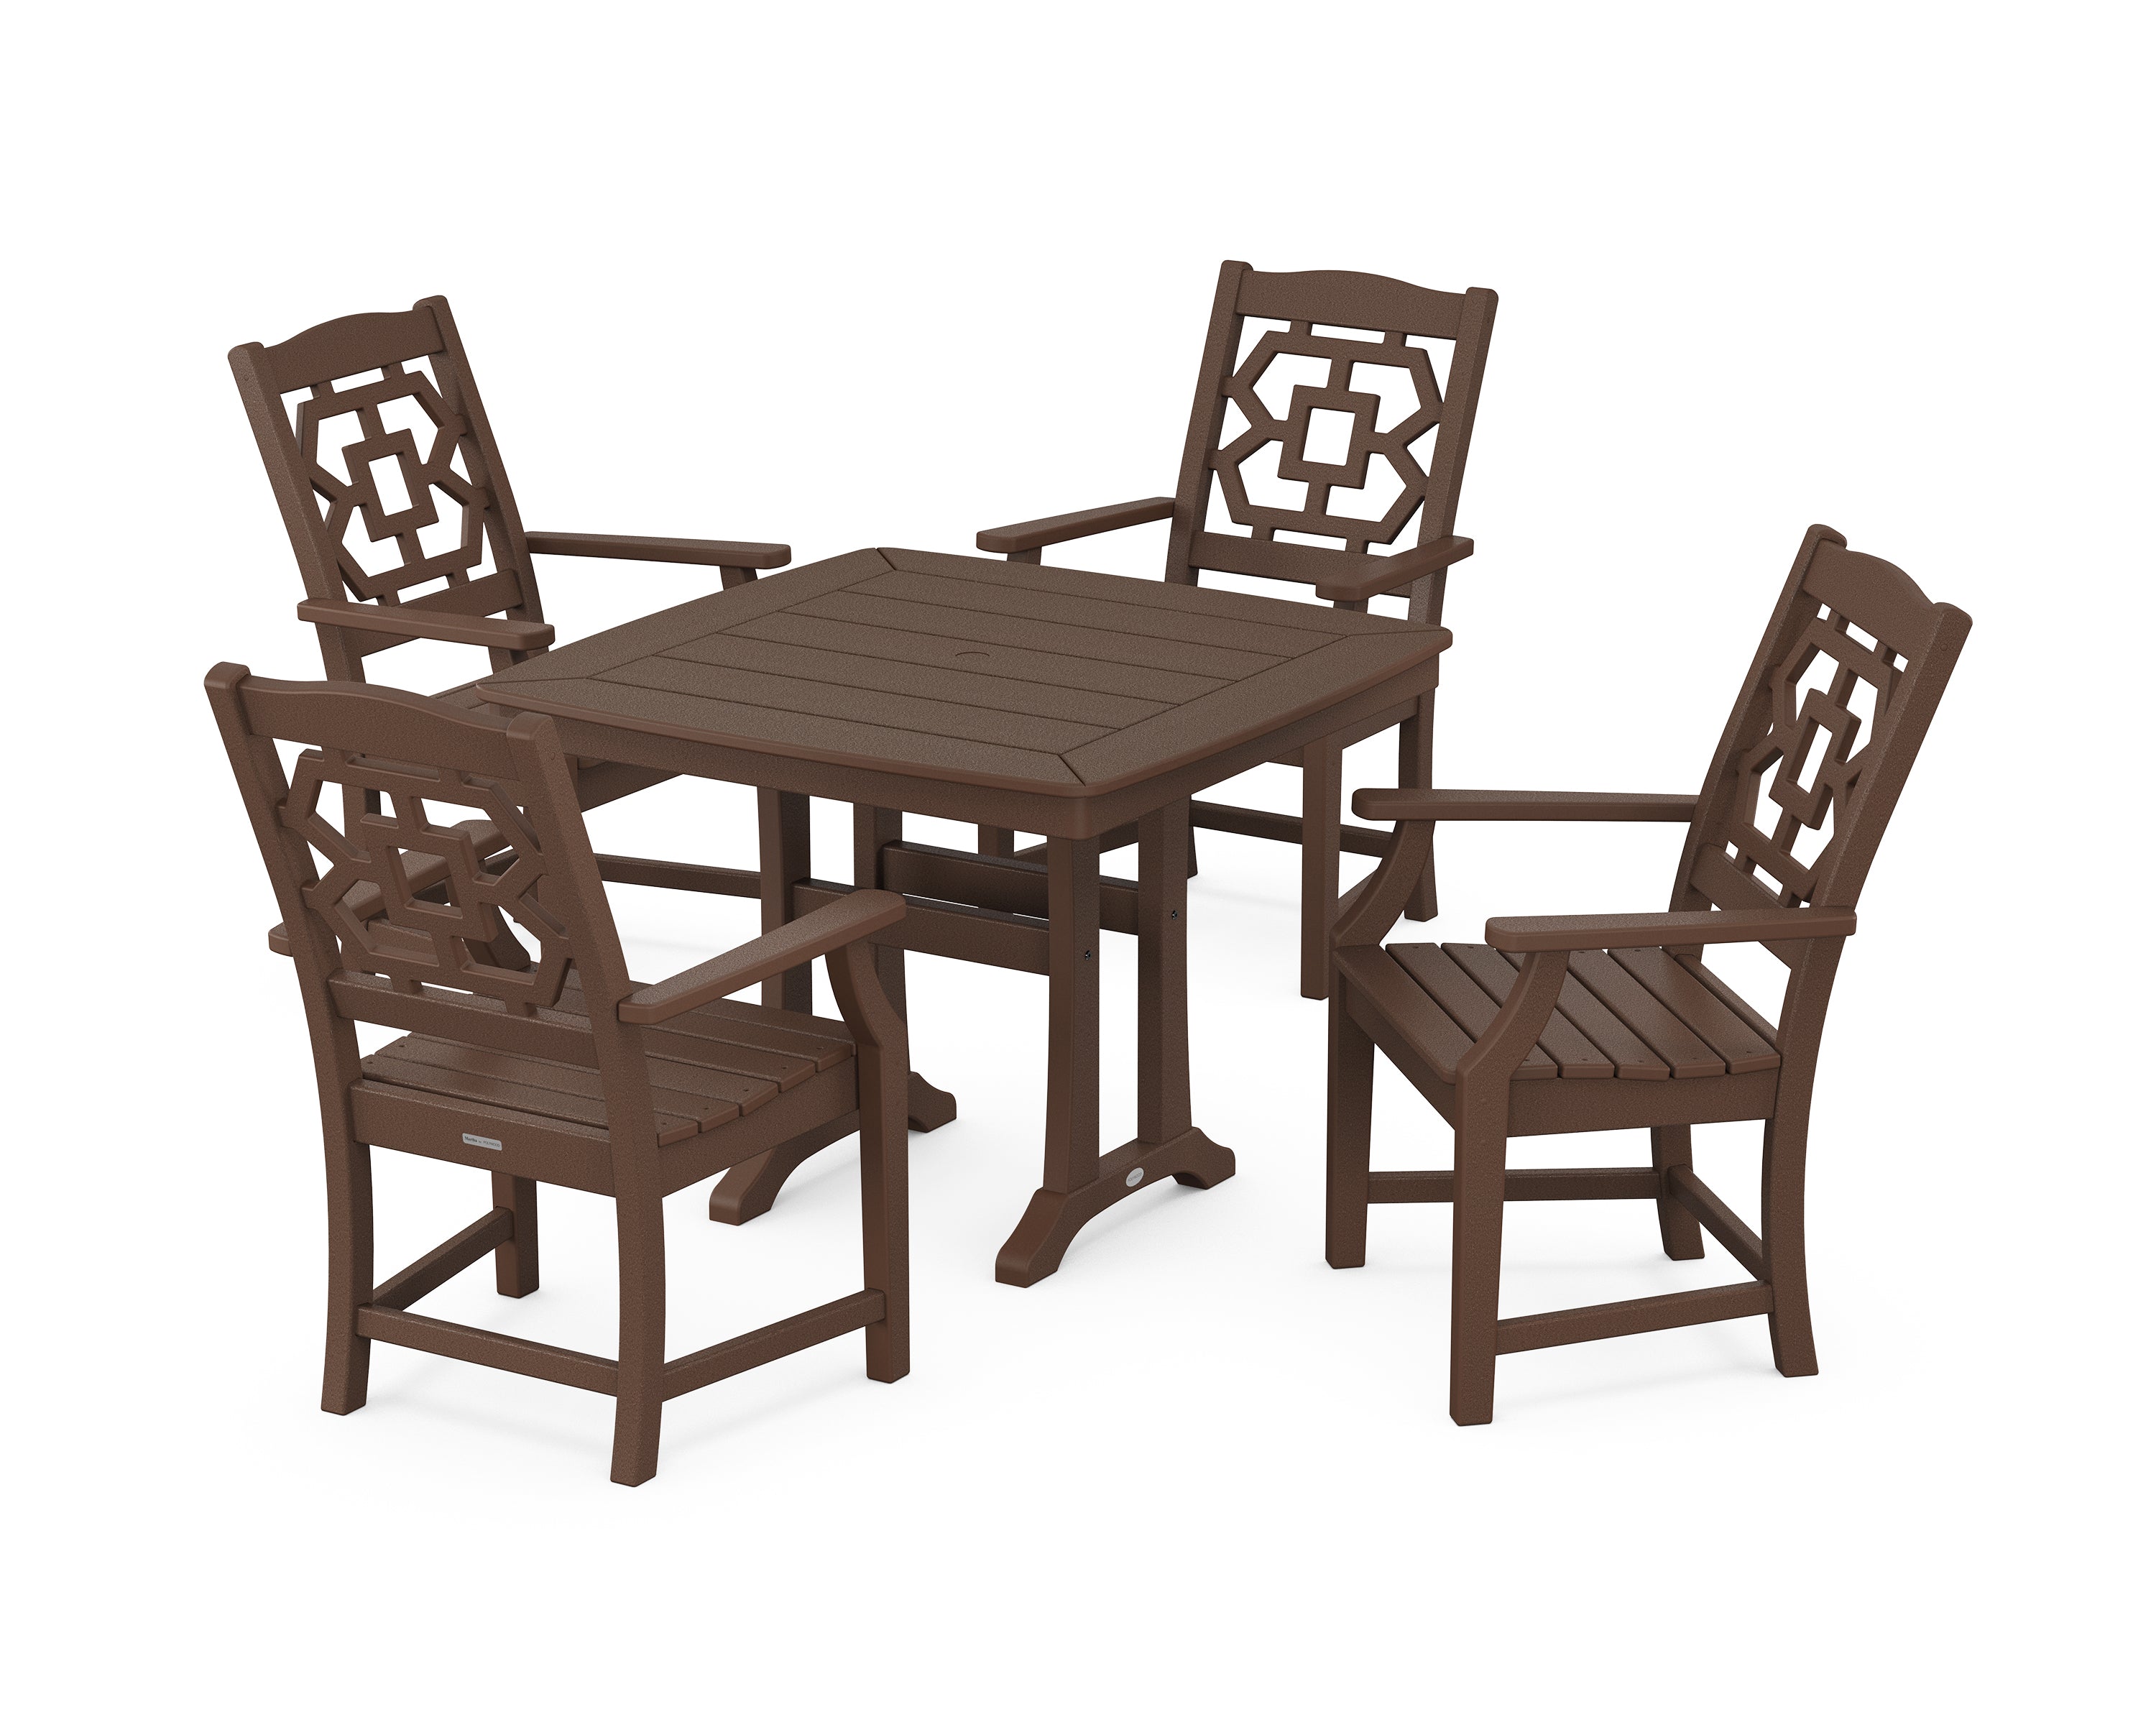 Martha Stewart by POLYWOOD® Chinoiserie 5-Piece Dining Set with Trestle Legs in Mahogany